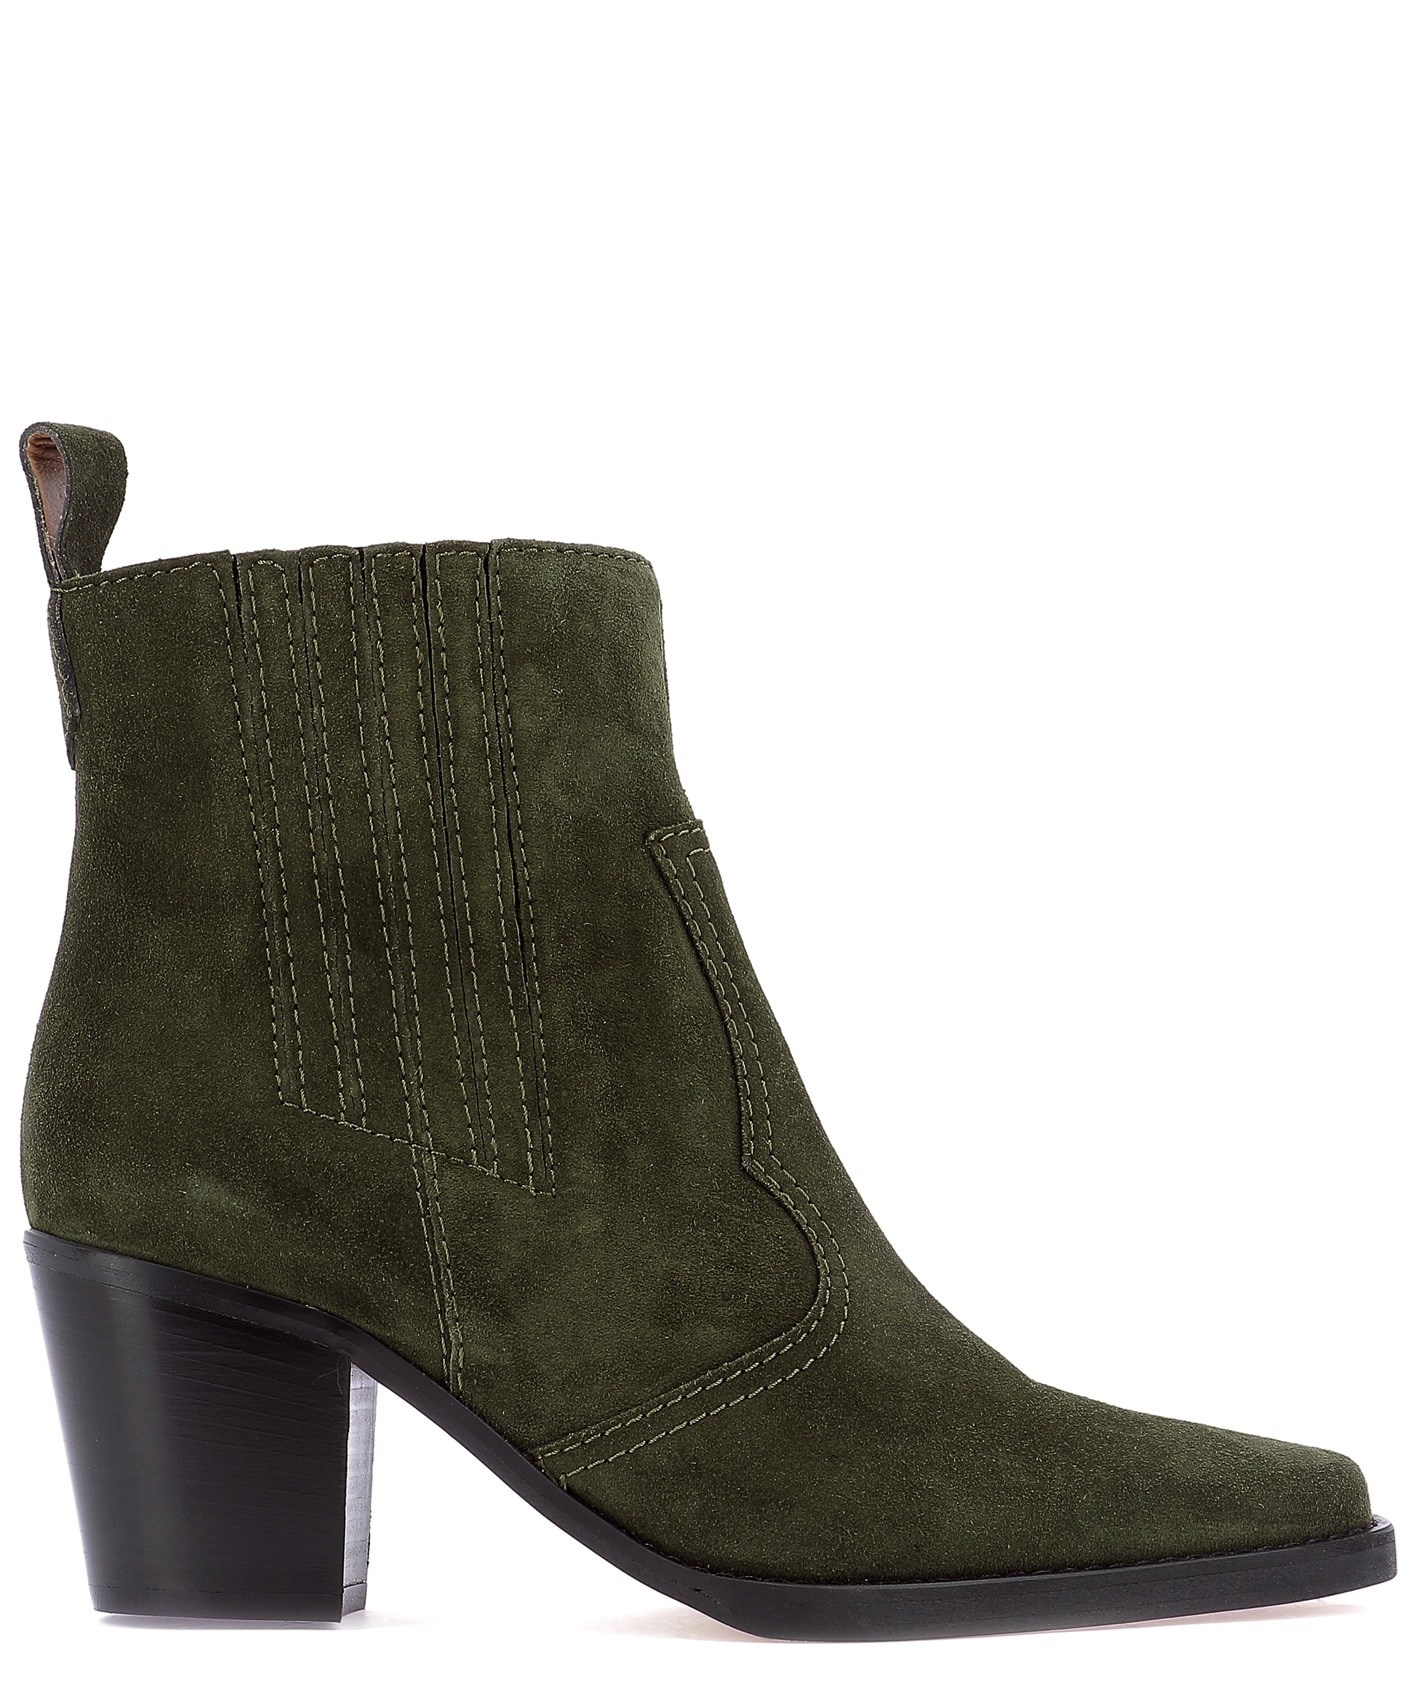 【GANNI】Suede ankle boot with elasticized bands